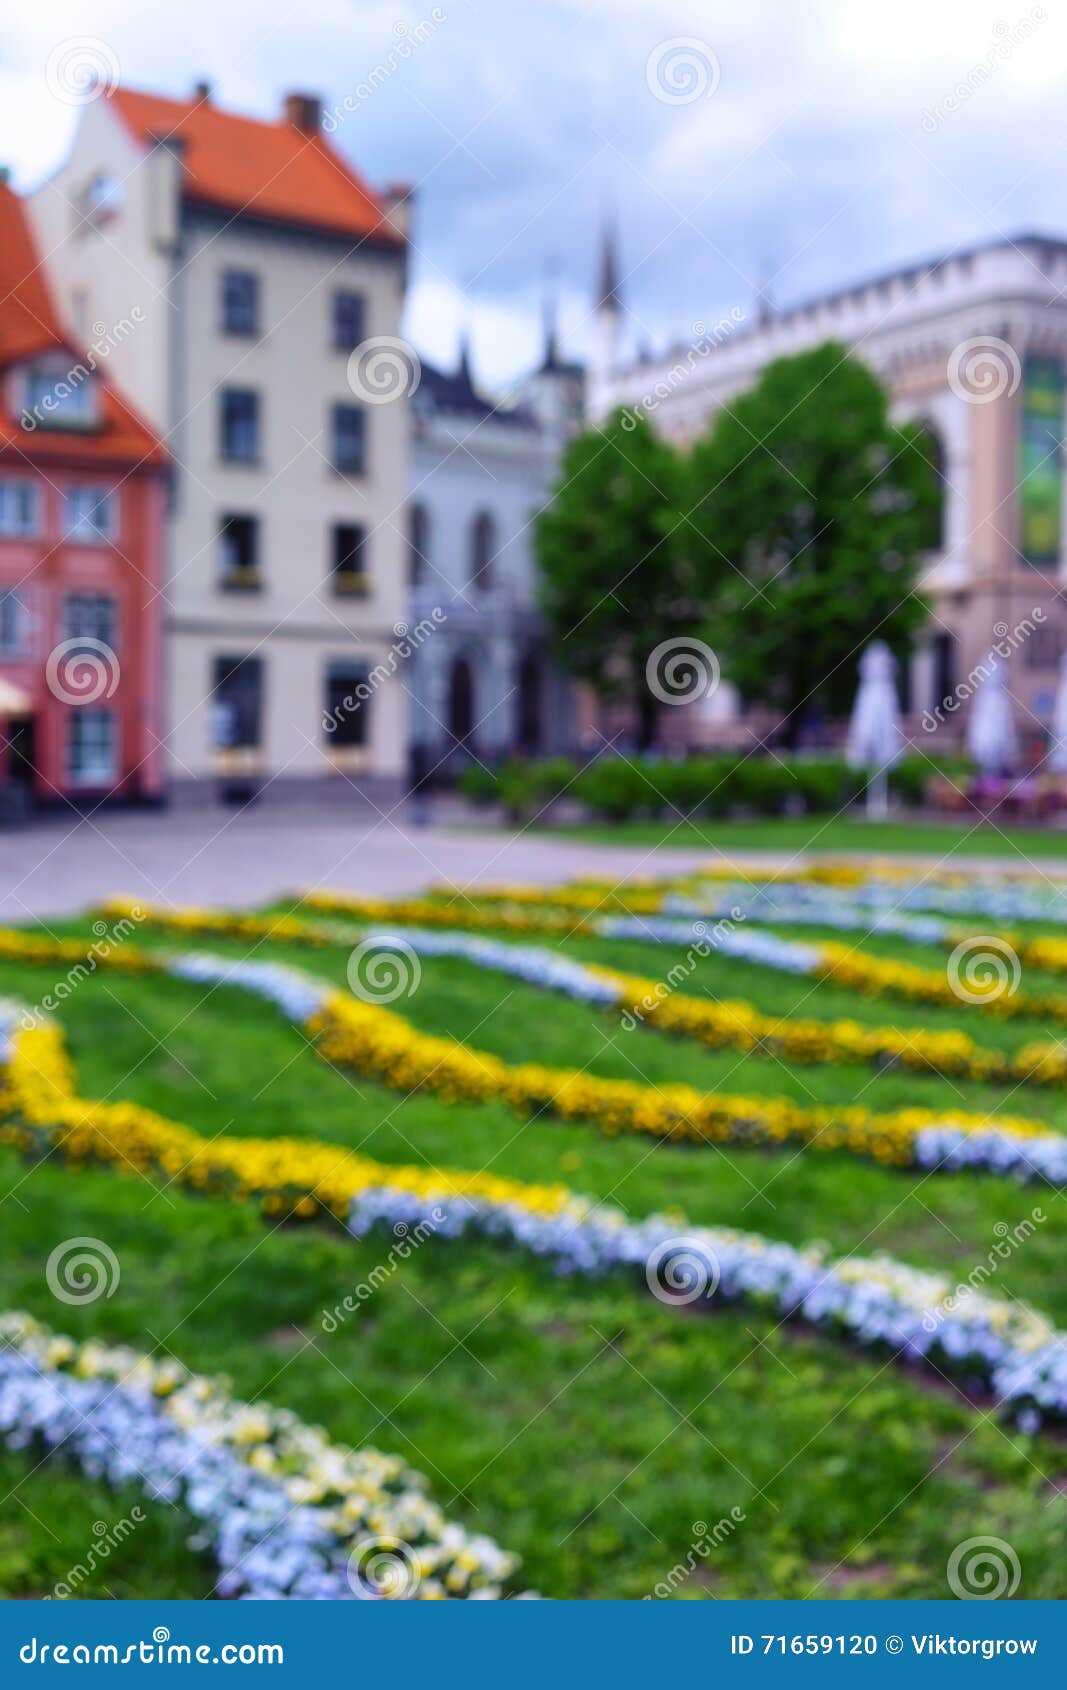 liv square in the old town of riga in spring. blurry